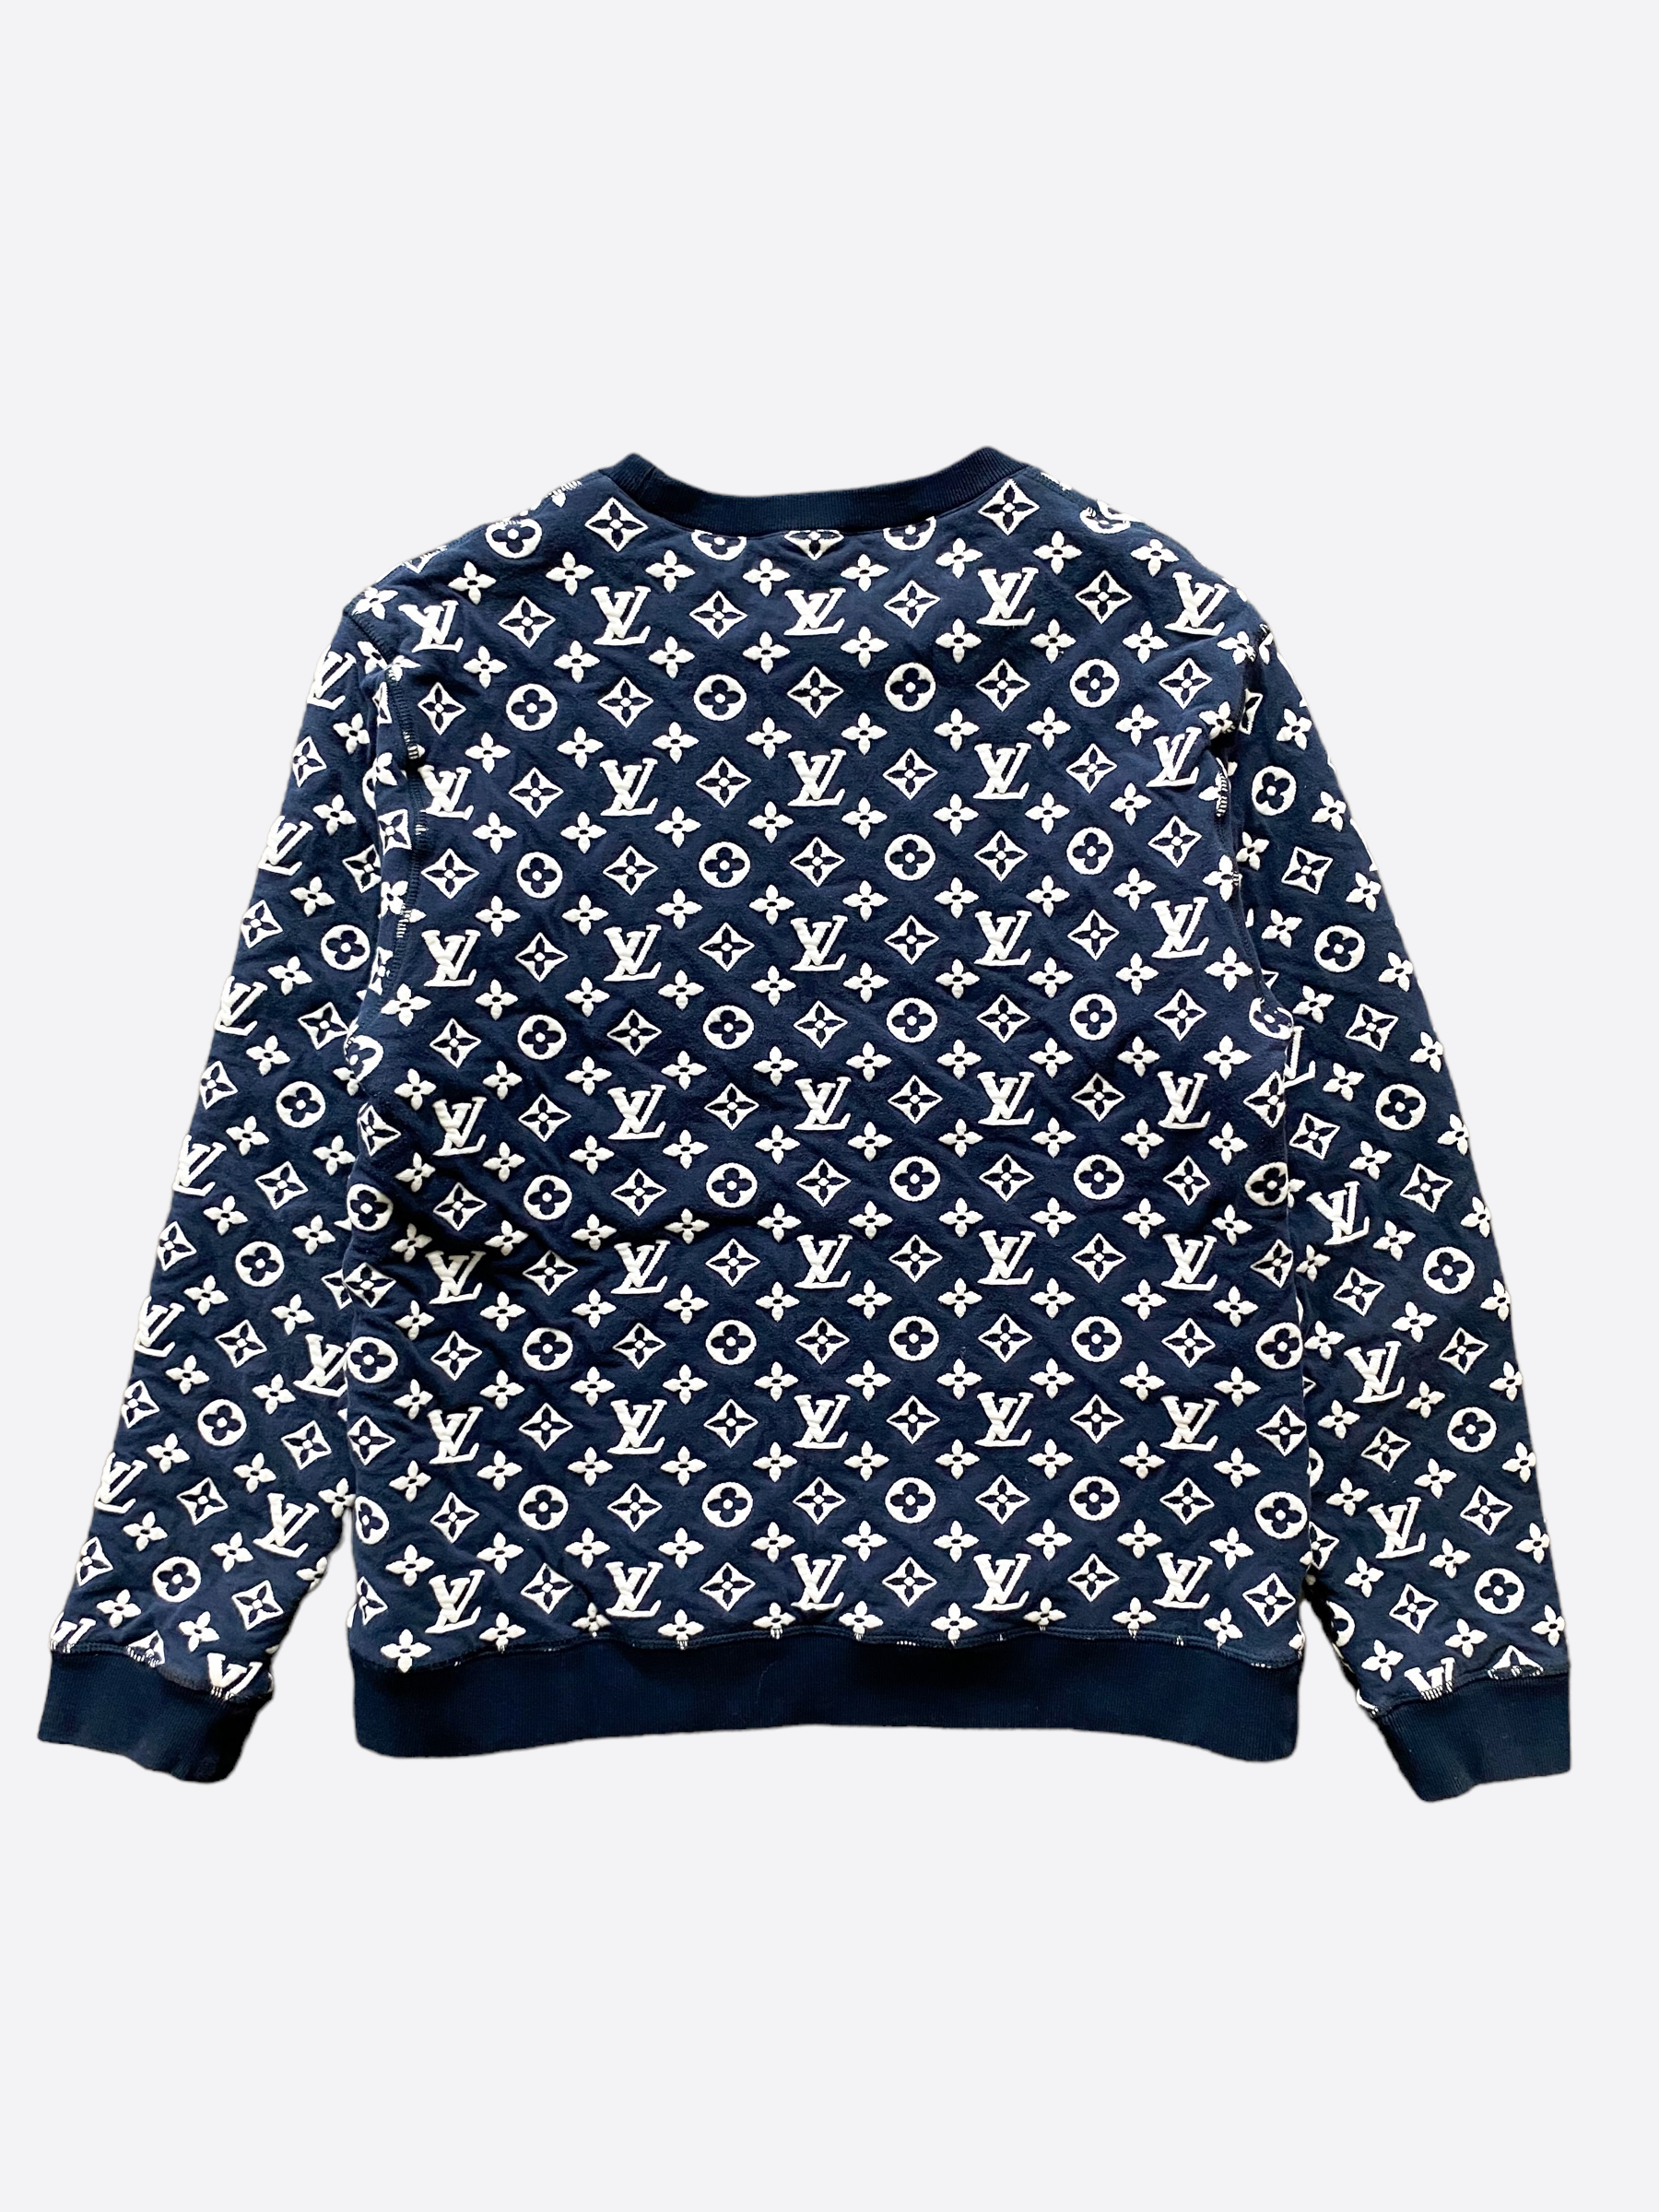 Louis Vuitton 2021 LV Monogram Pullover - Blue Sweaters, Clothing